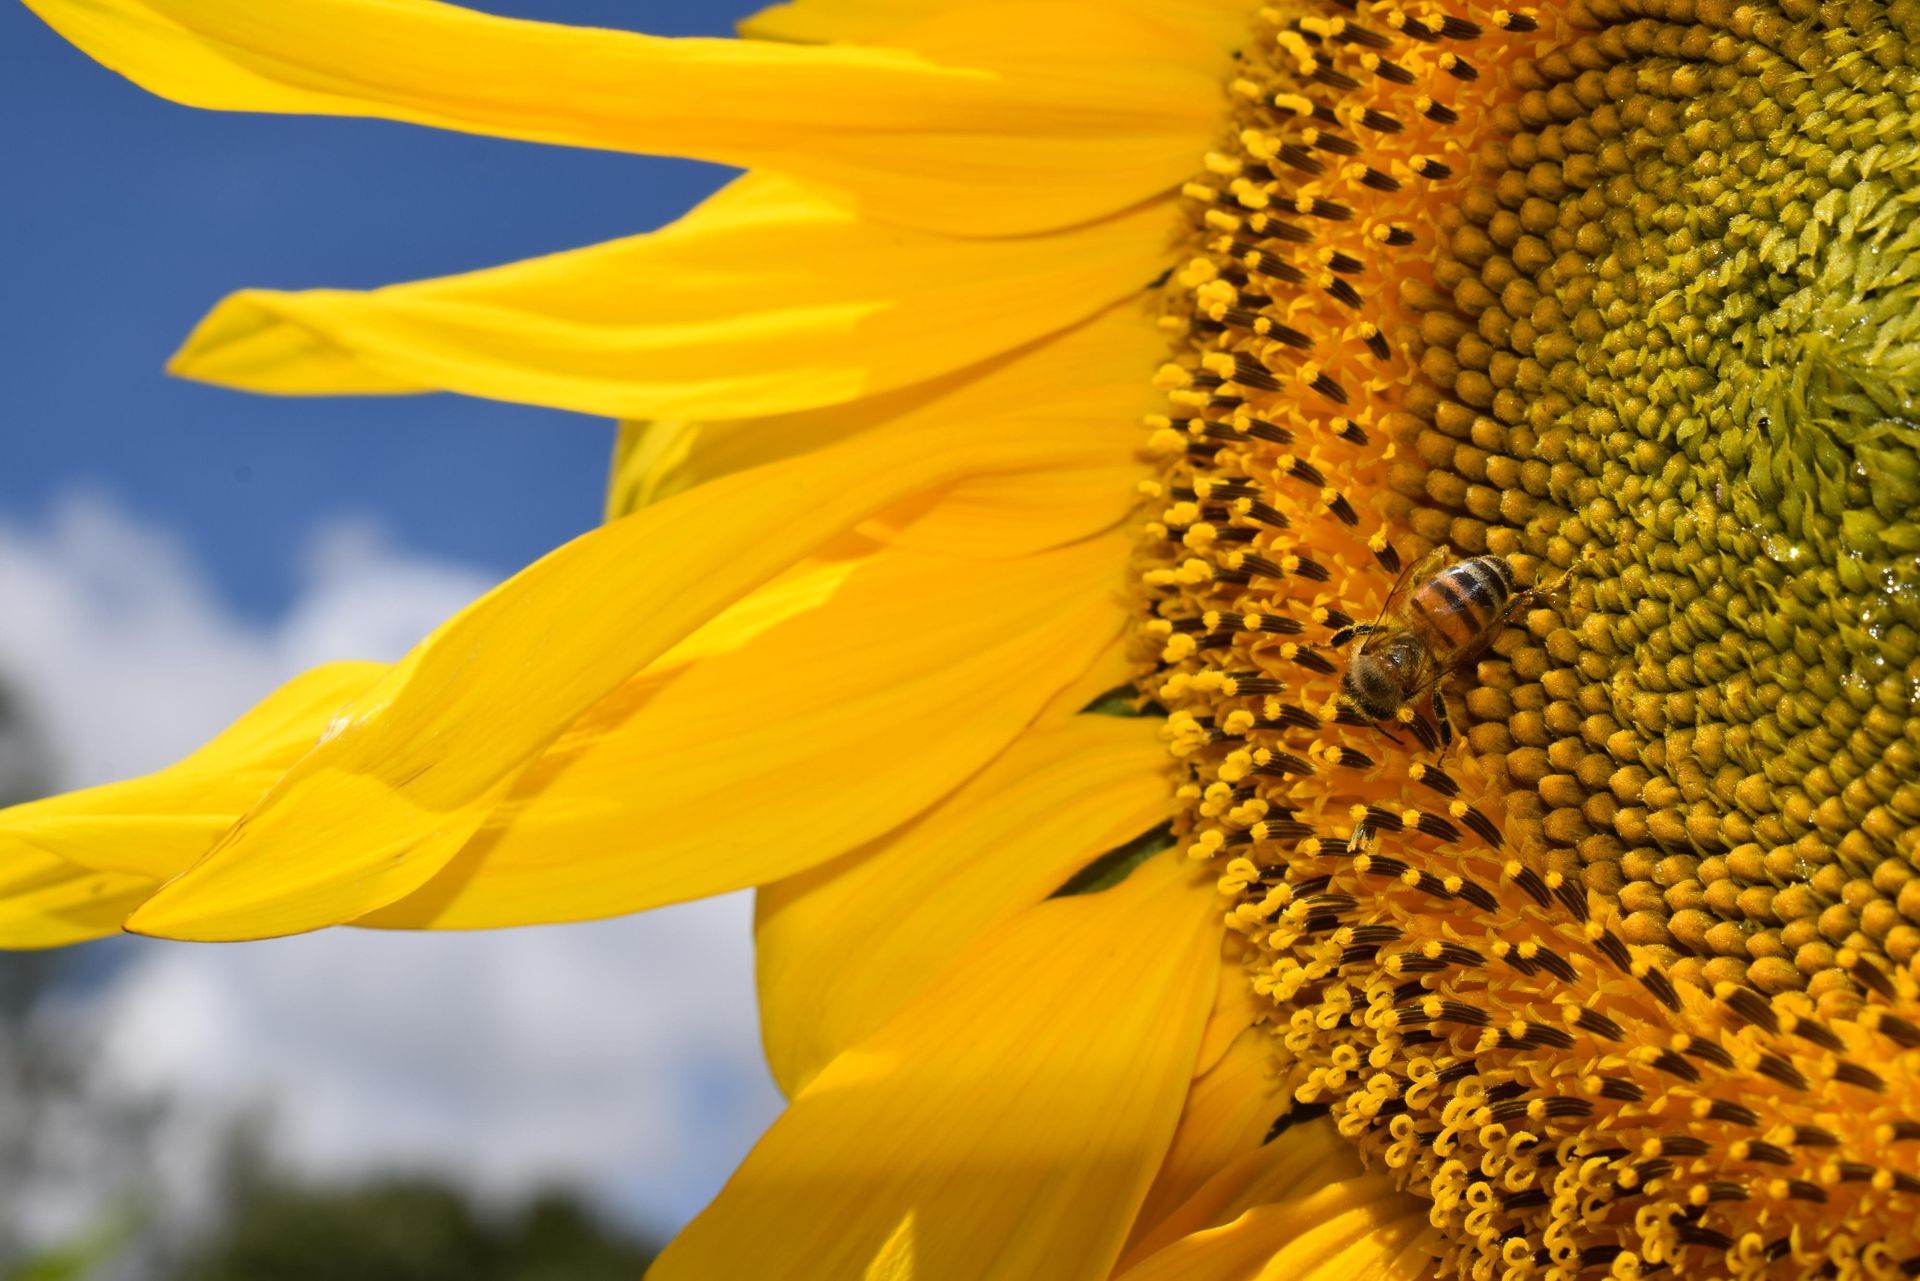 What is chasing bees away from their natural habitats to urban areas?